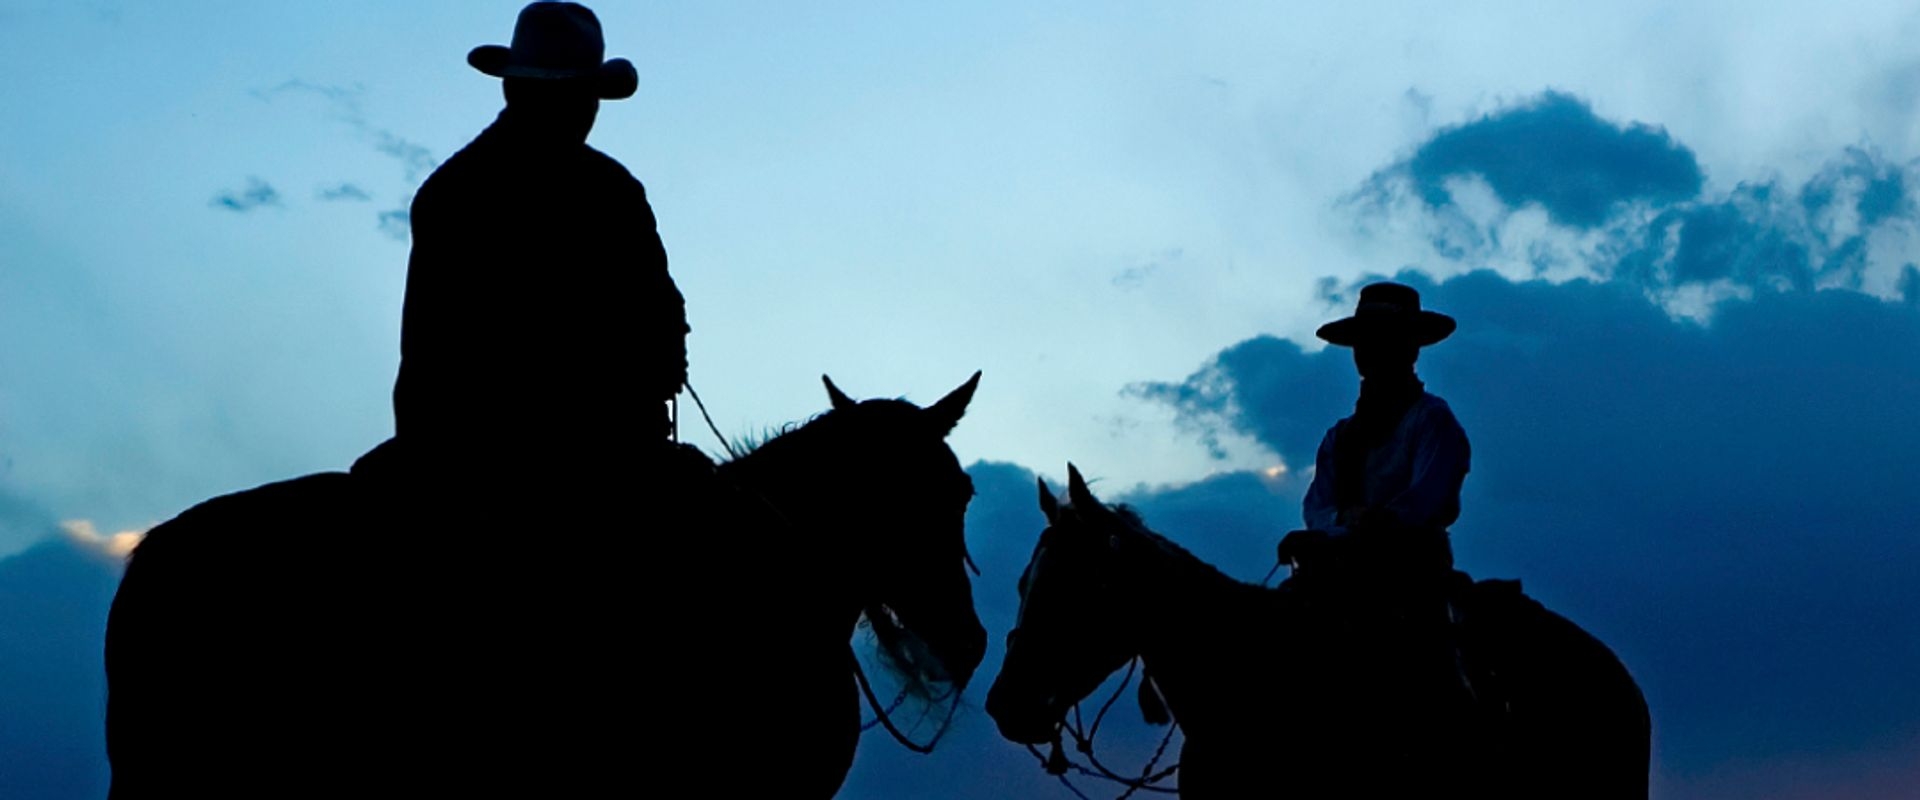 Two riders with cowboy hats silhouetted against a sunset backdrop